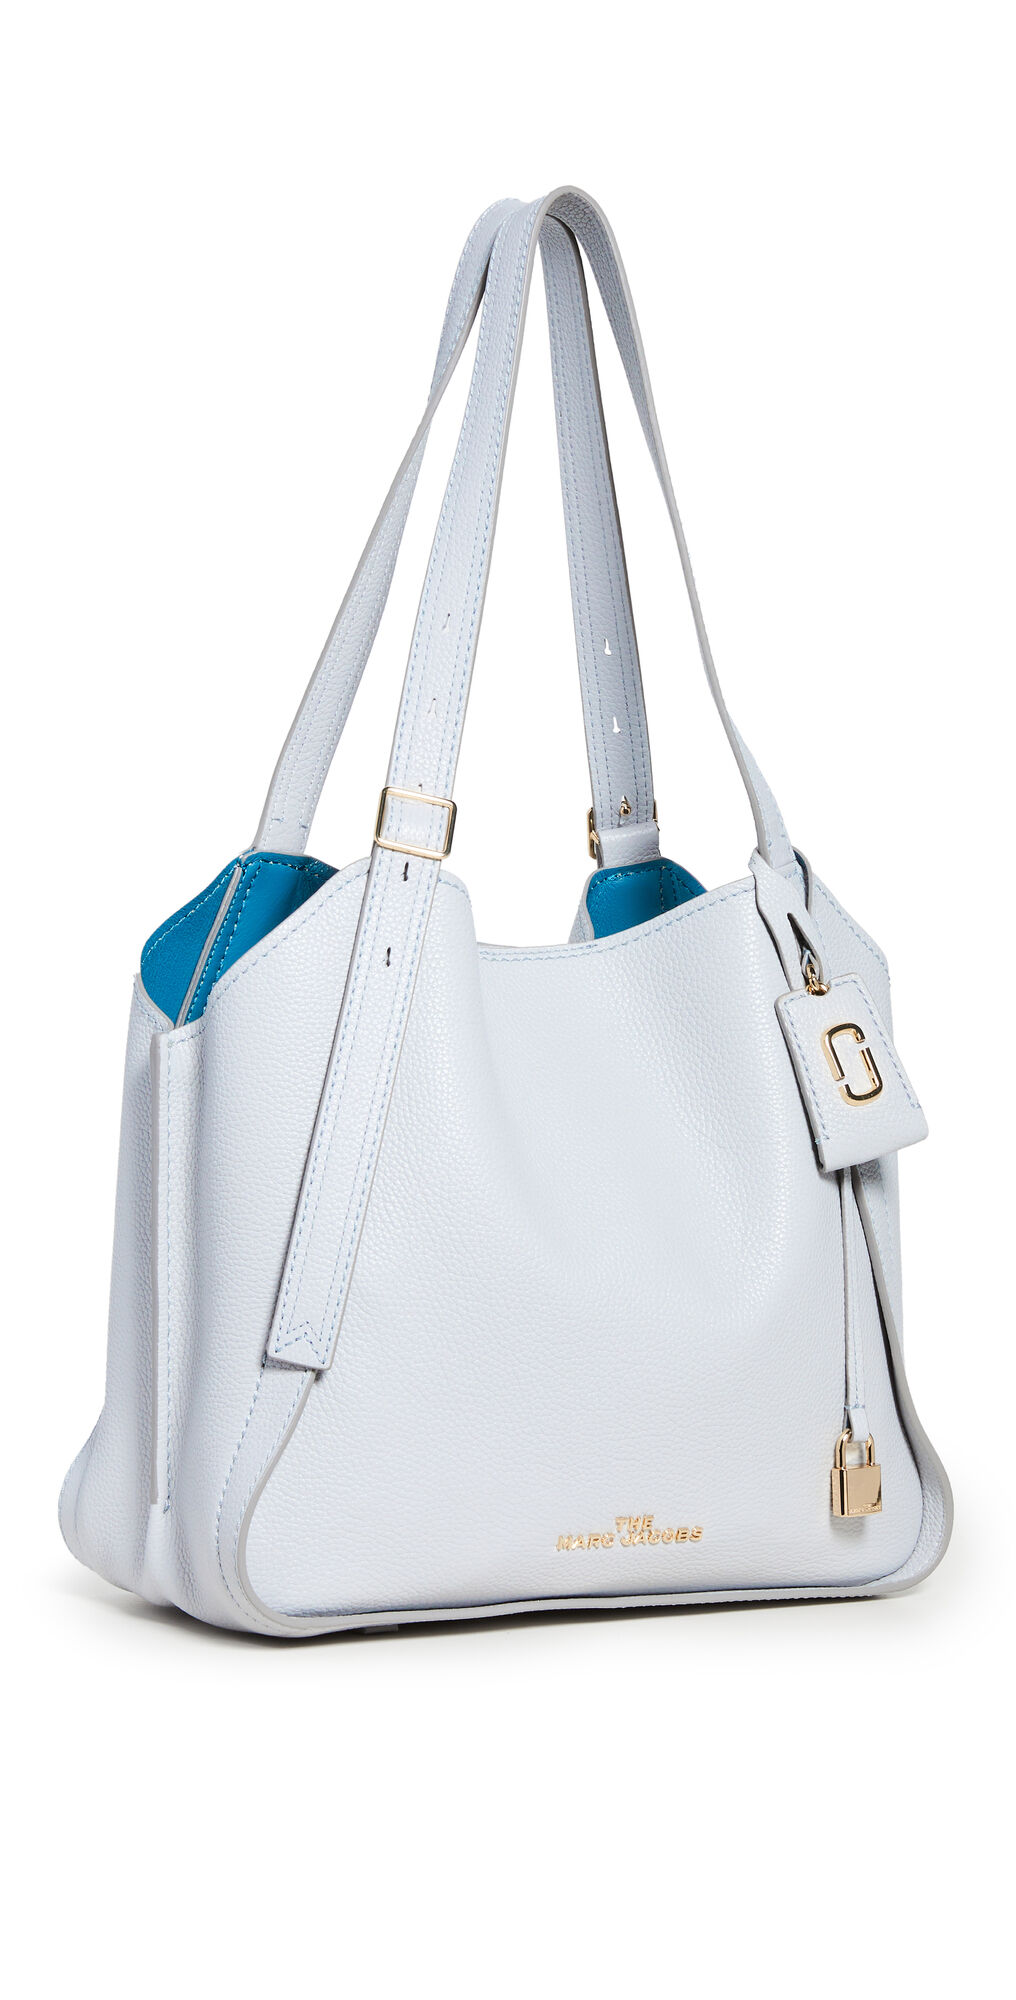 The Marc Jacobs The Director Tote Harbor Mist One Size  Harbor Mist  size:One Size